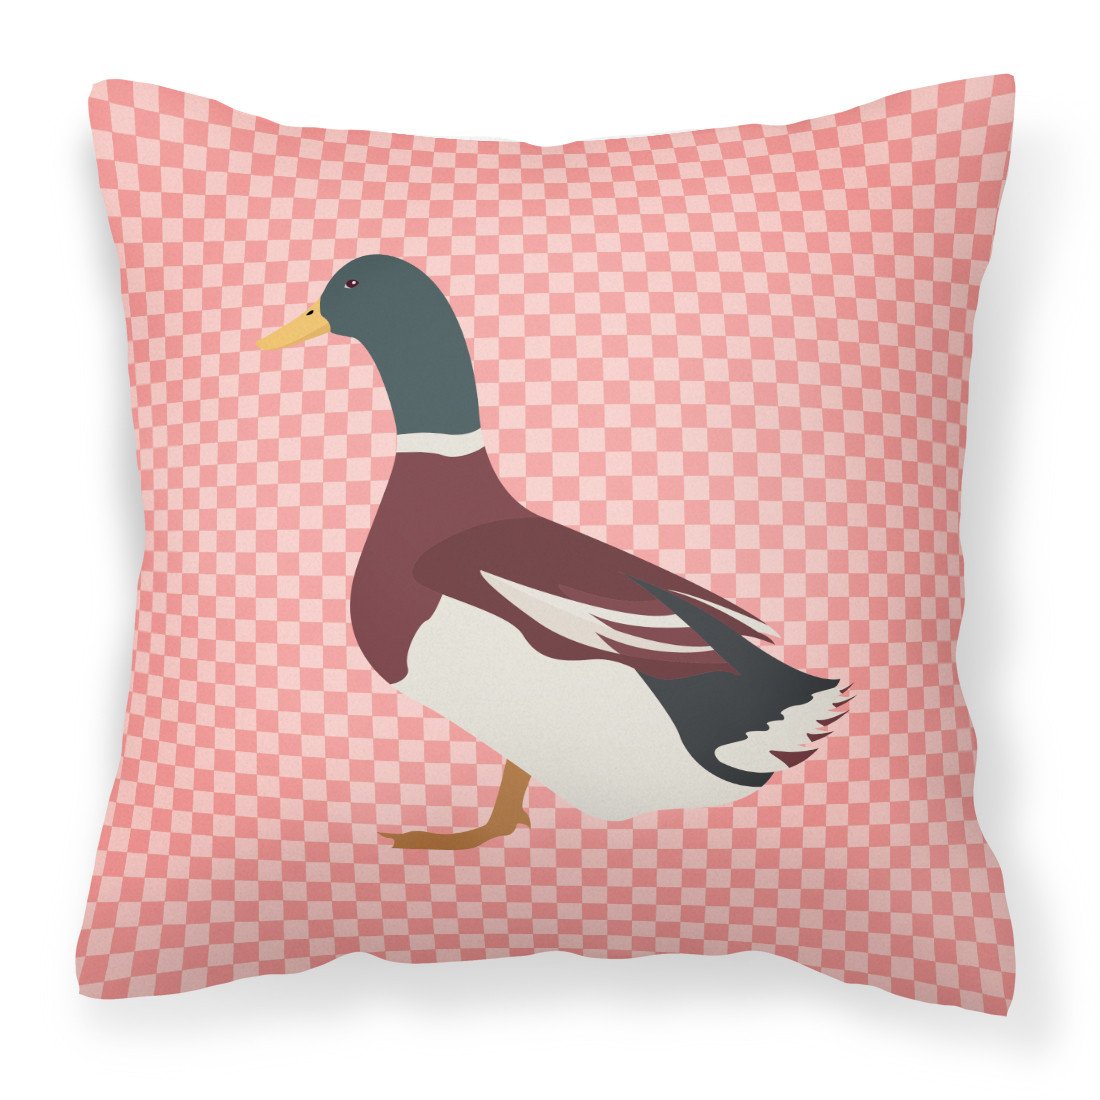 Rouen Duck Pink Check Fabric Decorative Pillow BB7856PW1818 by Caroline's Treasures